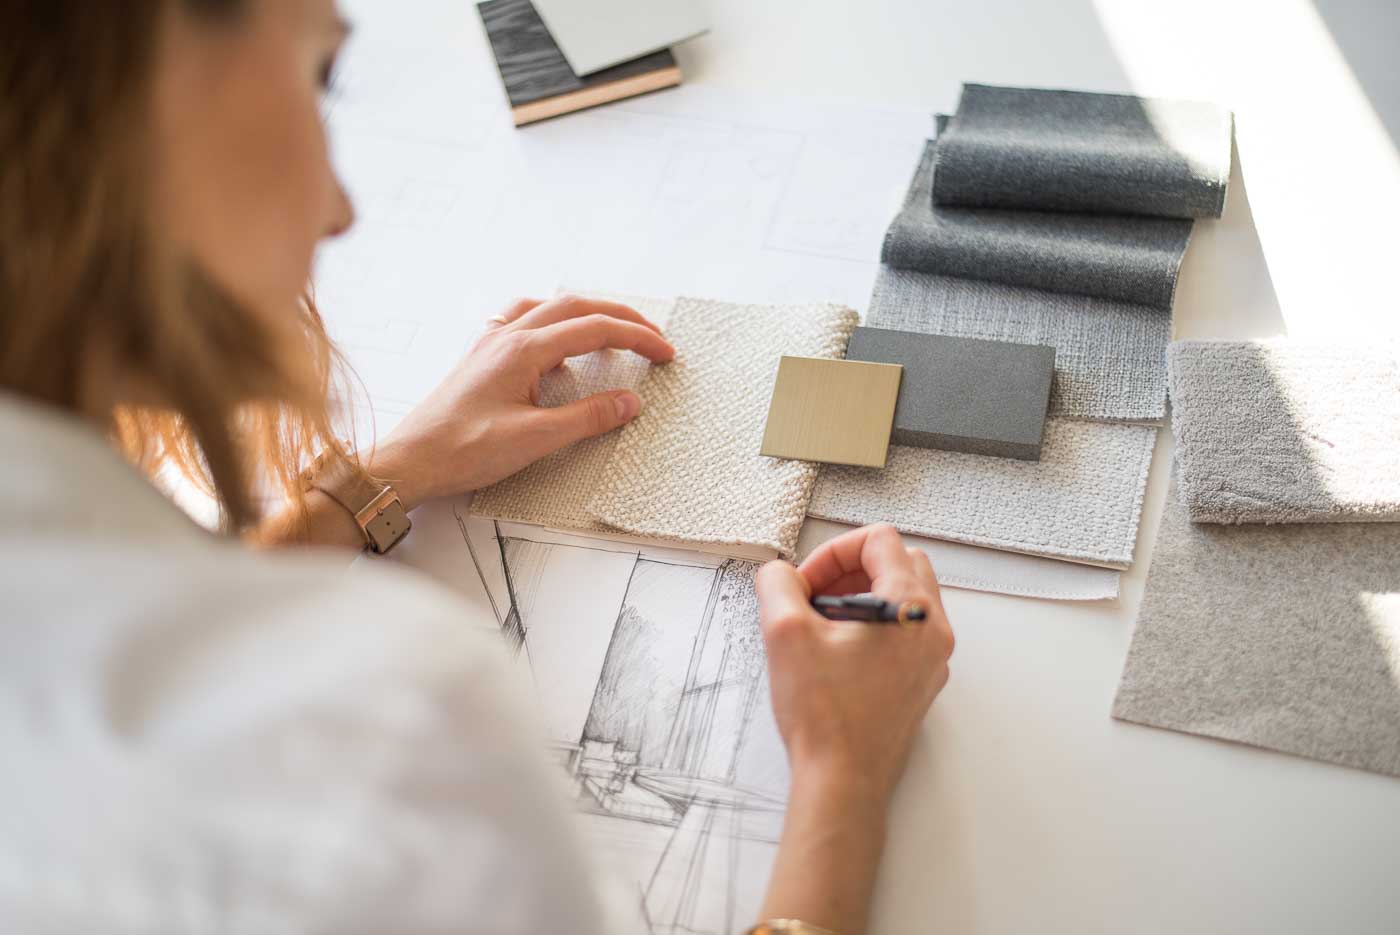 how much does an interior designer cost?